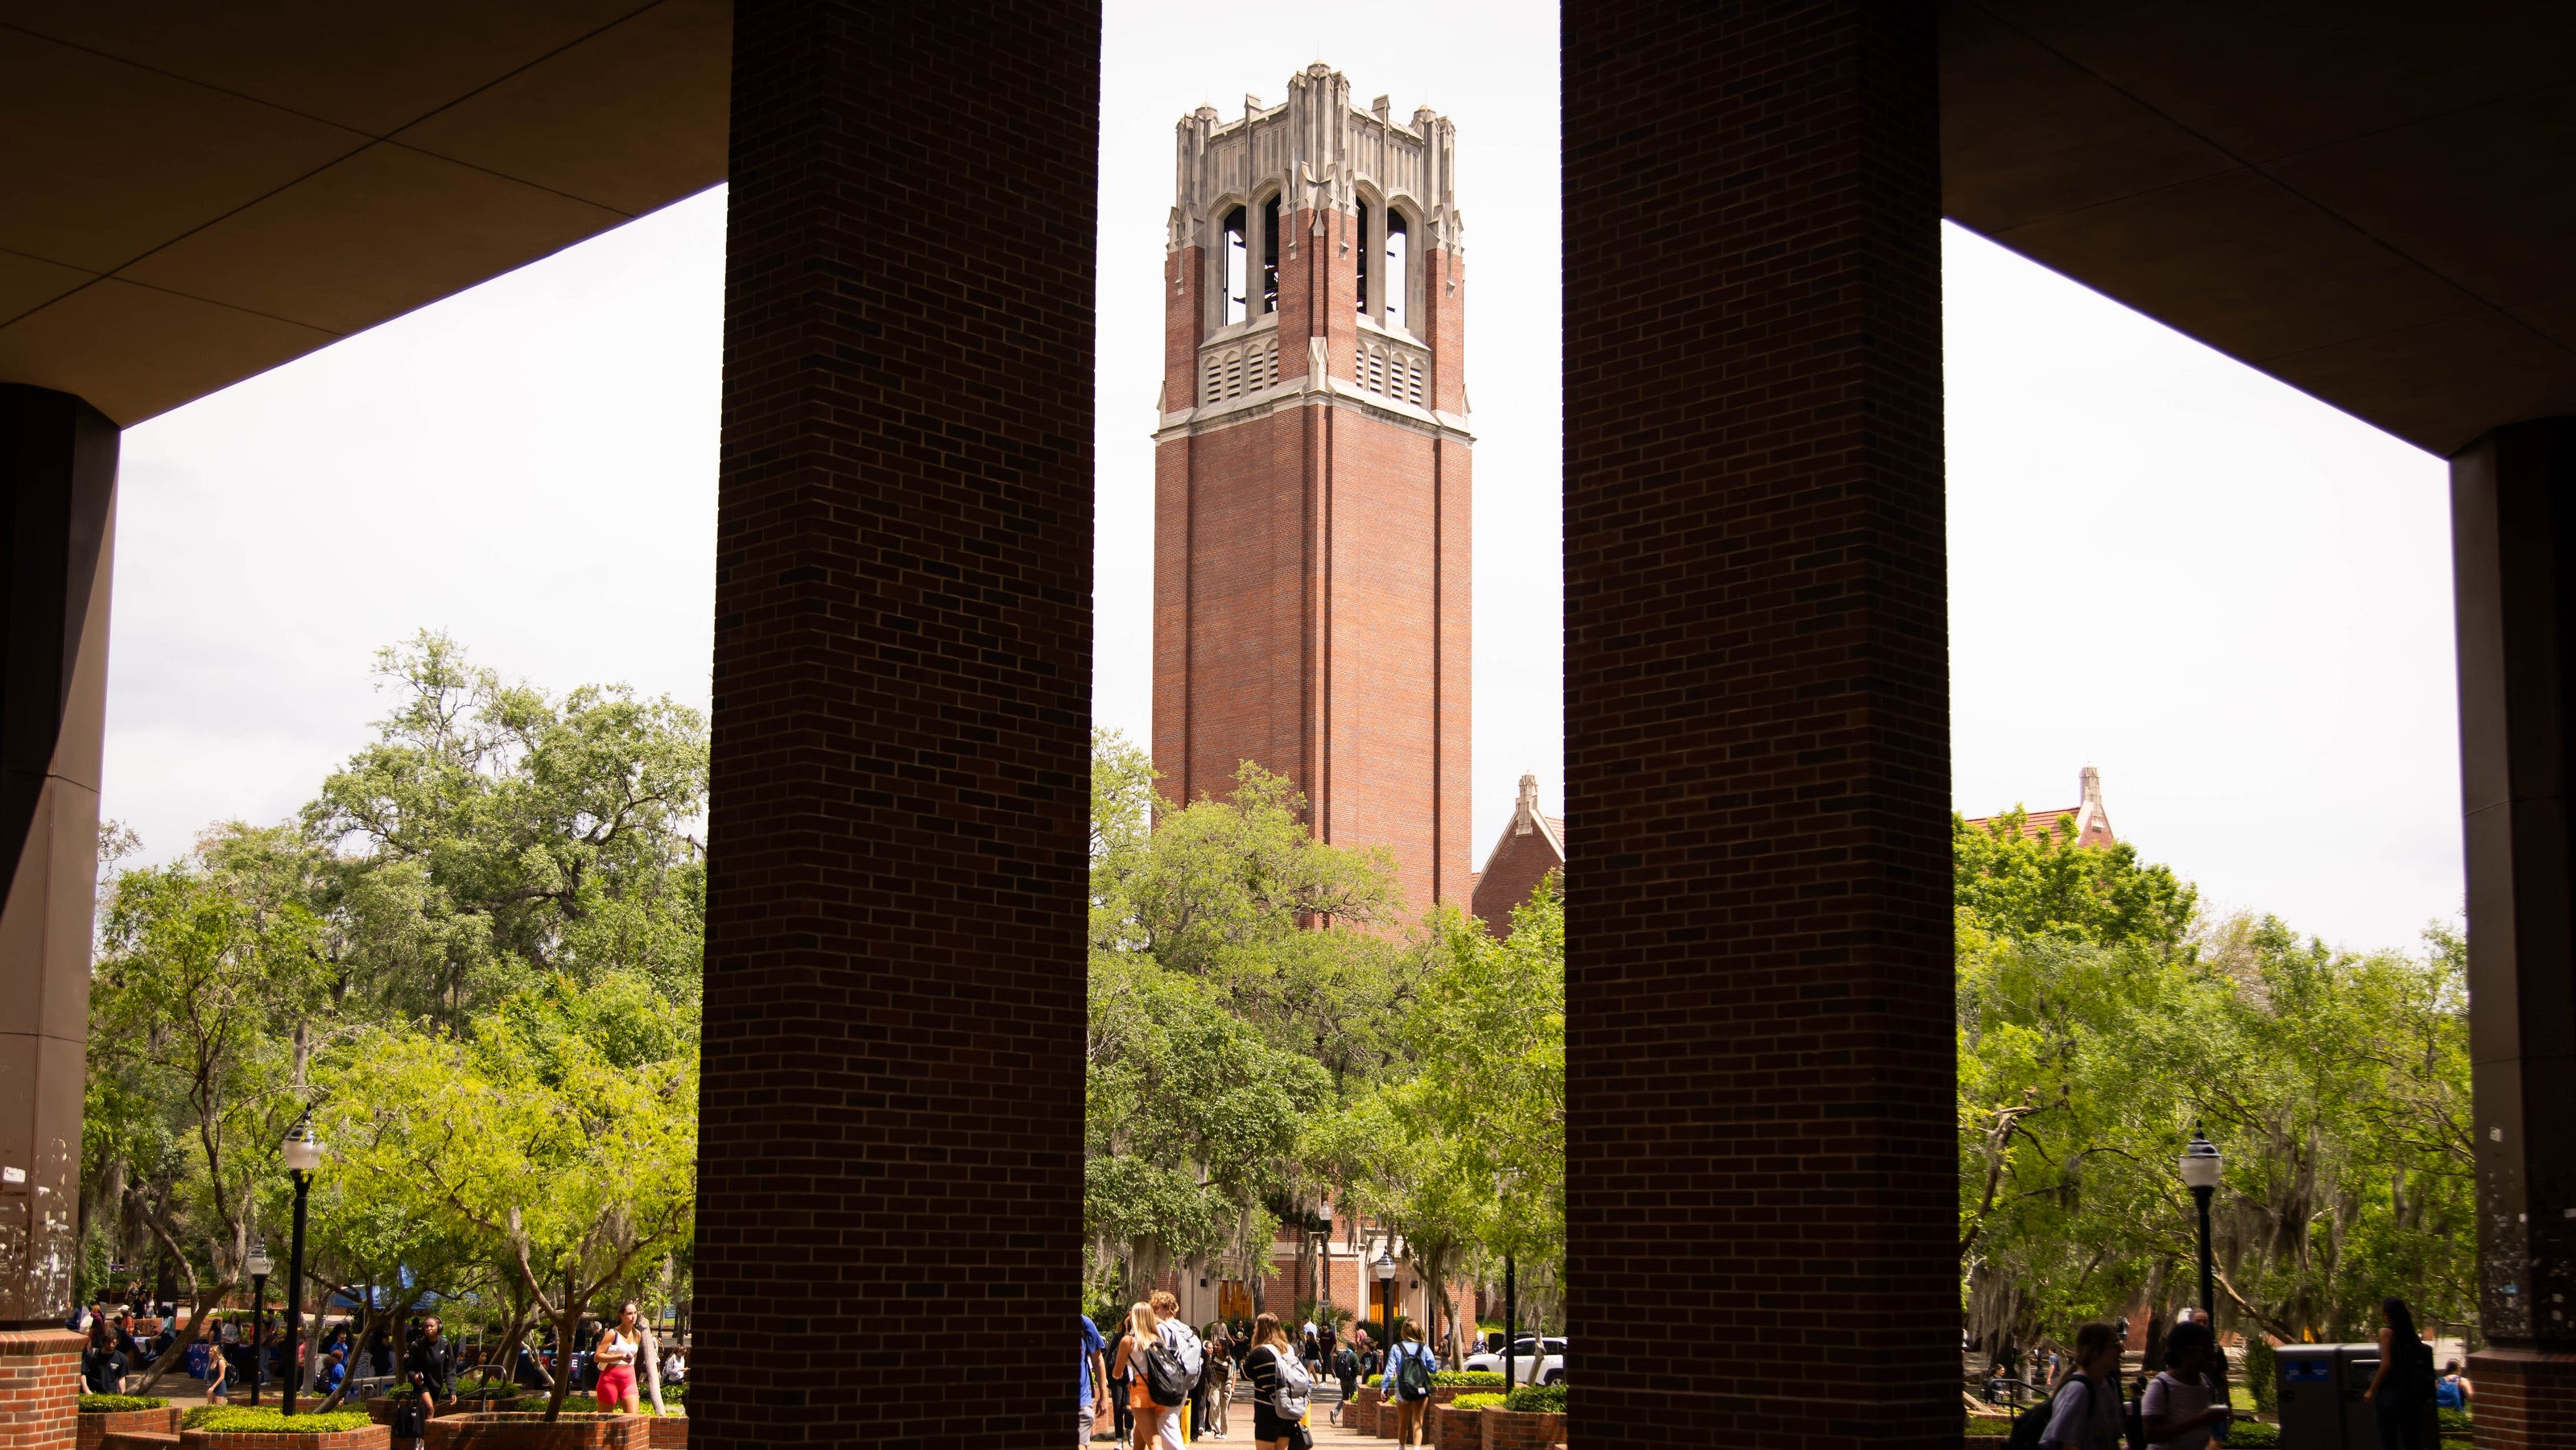 Ivy League? Forbes list puts UF among top 10 public 'New Ivies'